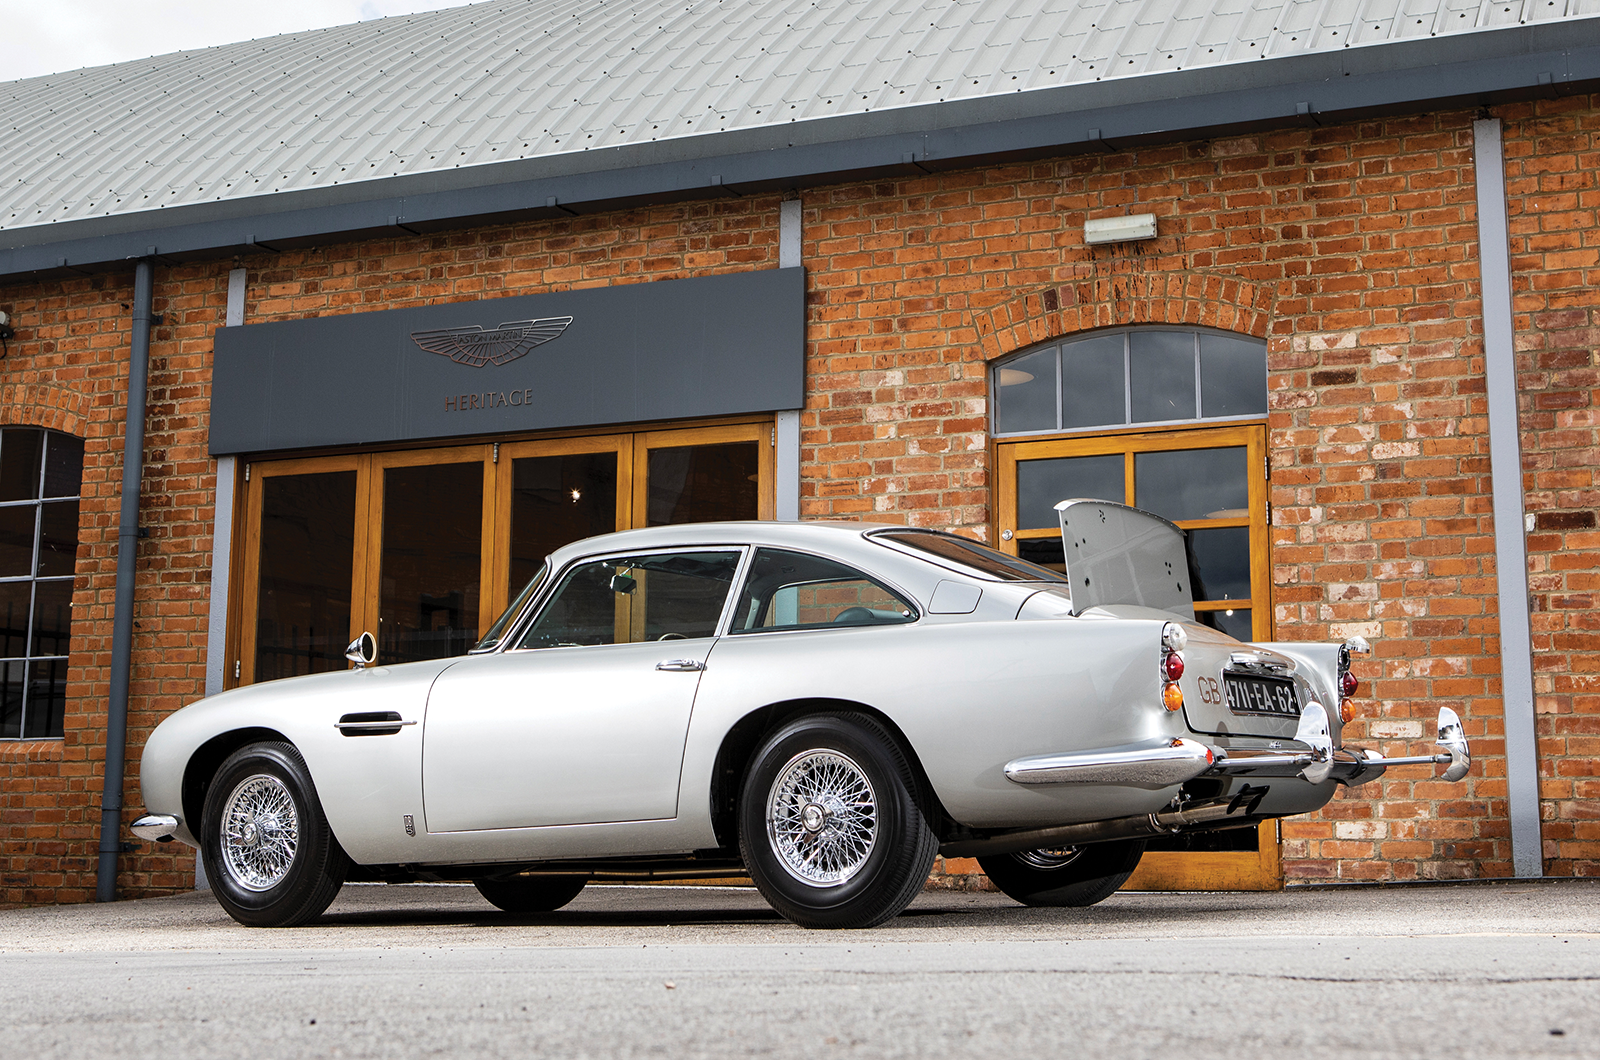 Classic & Sports Car – Bond’s actual Aston Martin DB5 is coming to auction